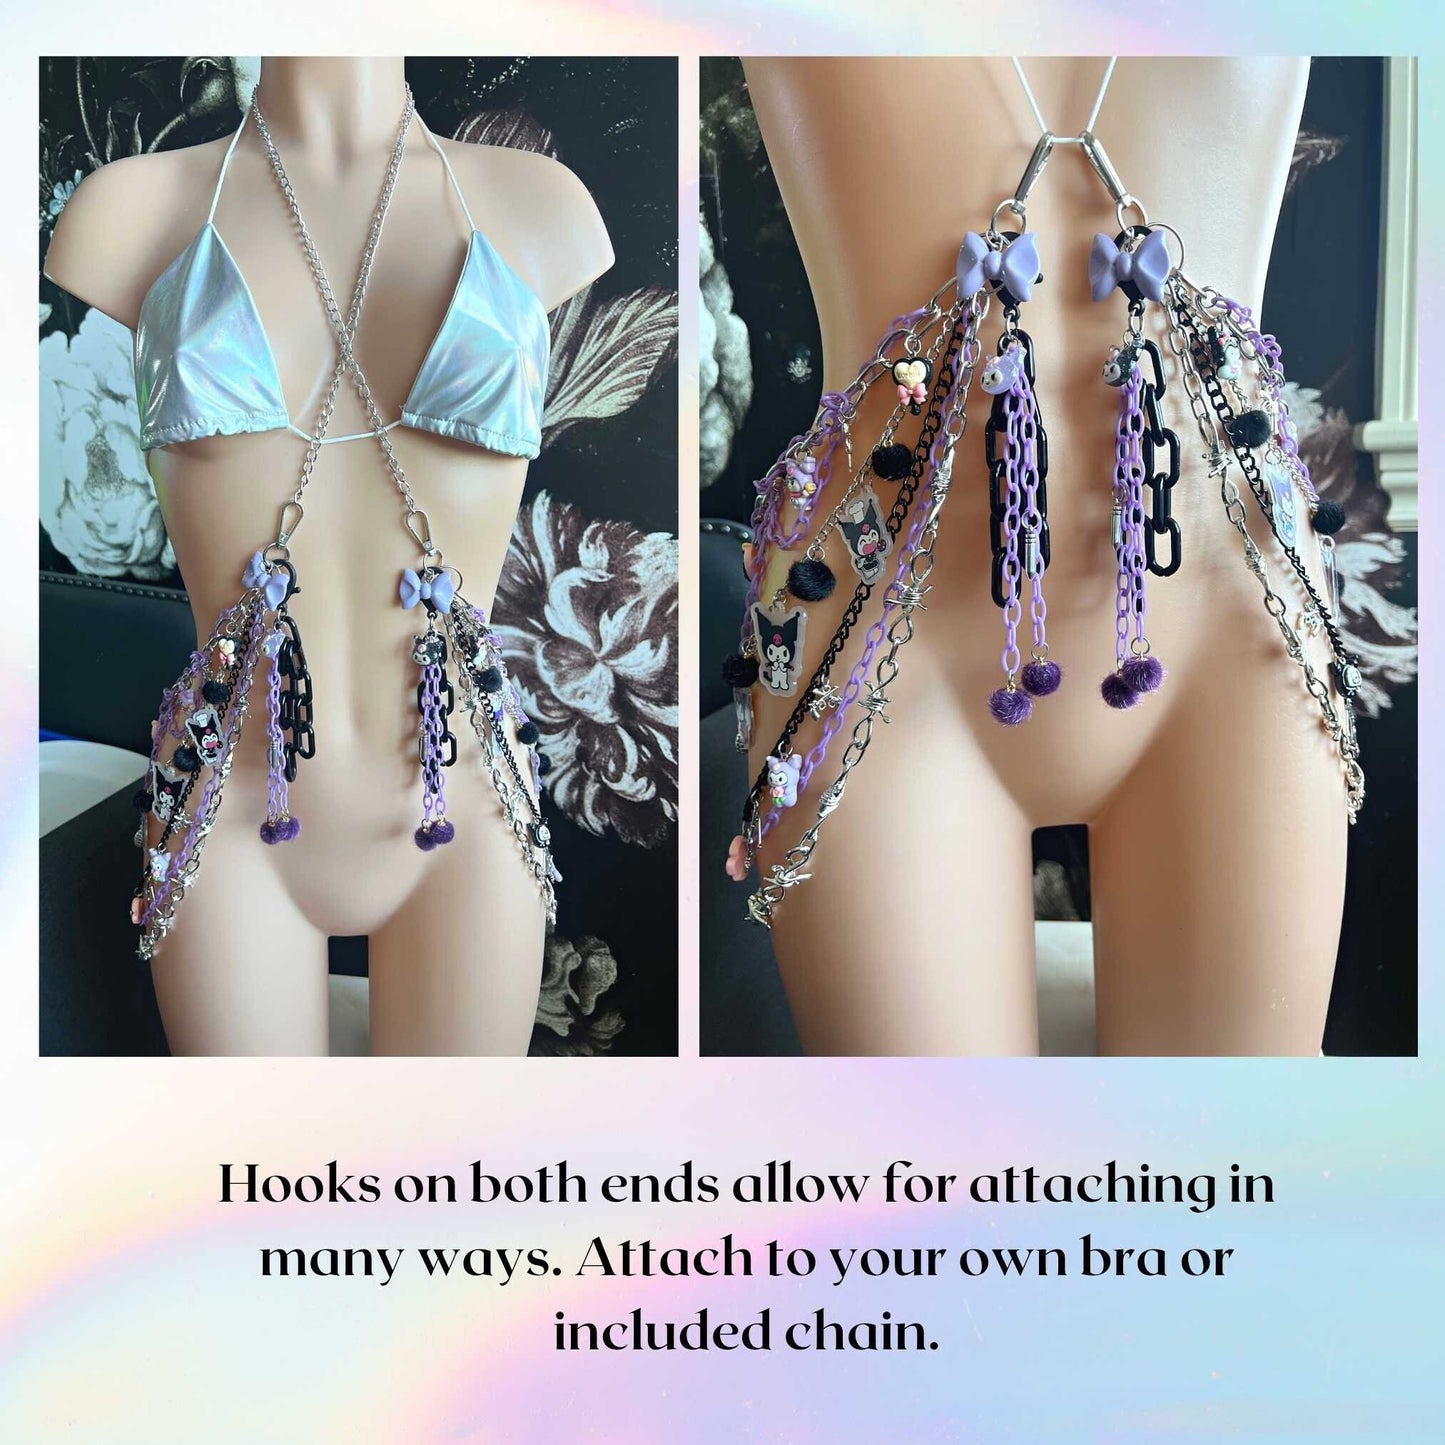 Custom Body Harness Chain Charm Harness Y2k clothing Rave Harness Rave Outfit Festival Outfit EDC Harness Rave Set Charm Rave Outfit